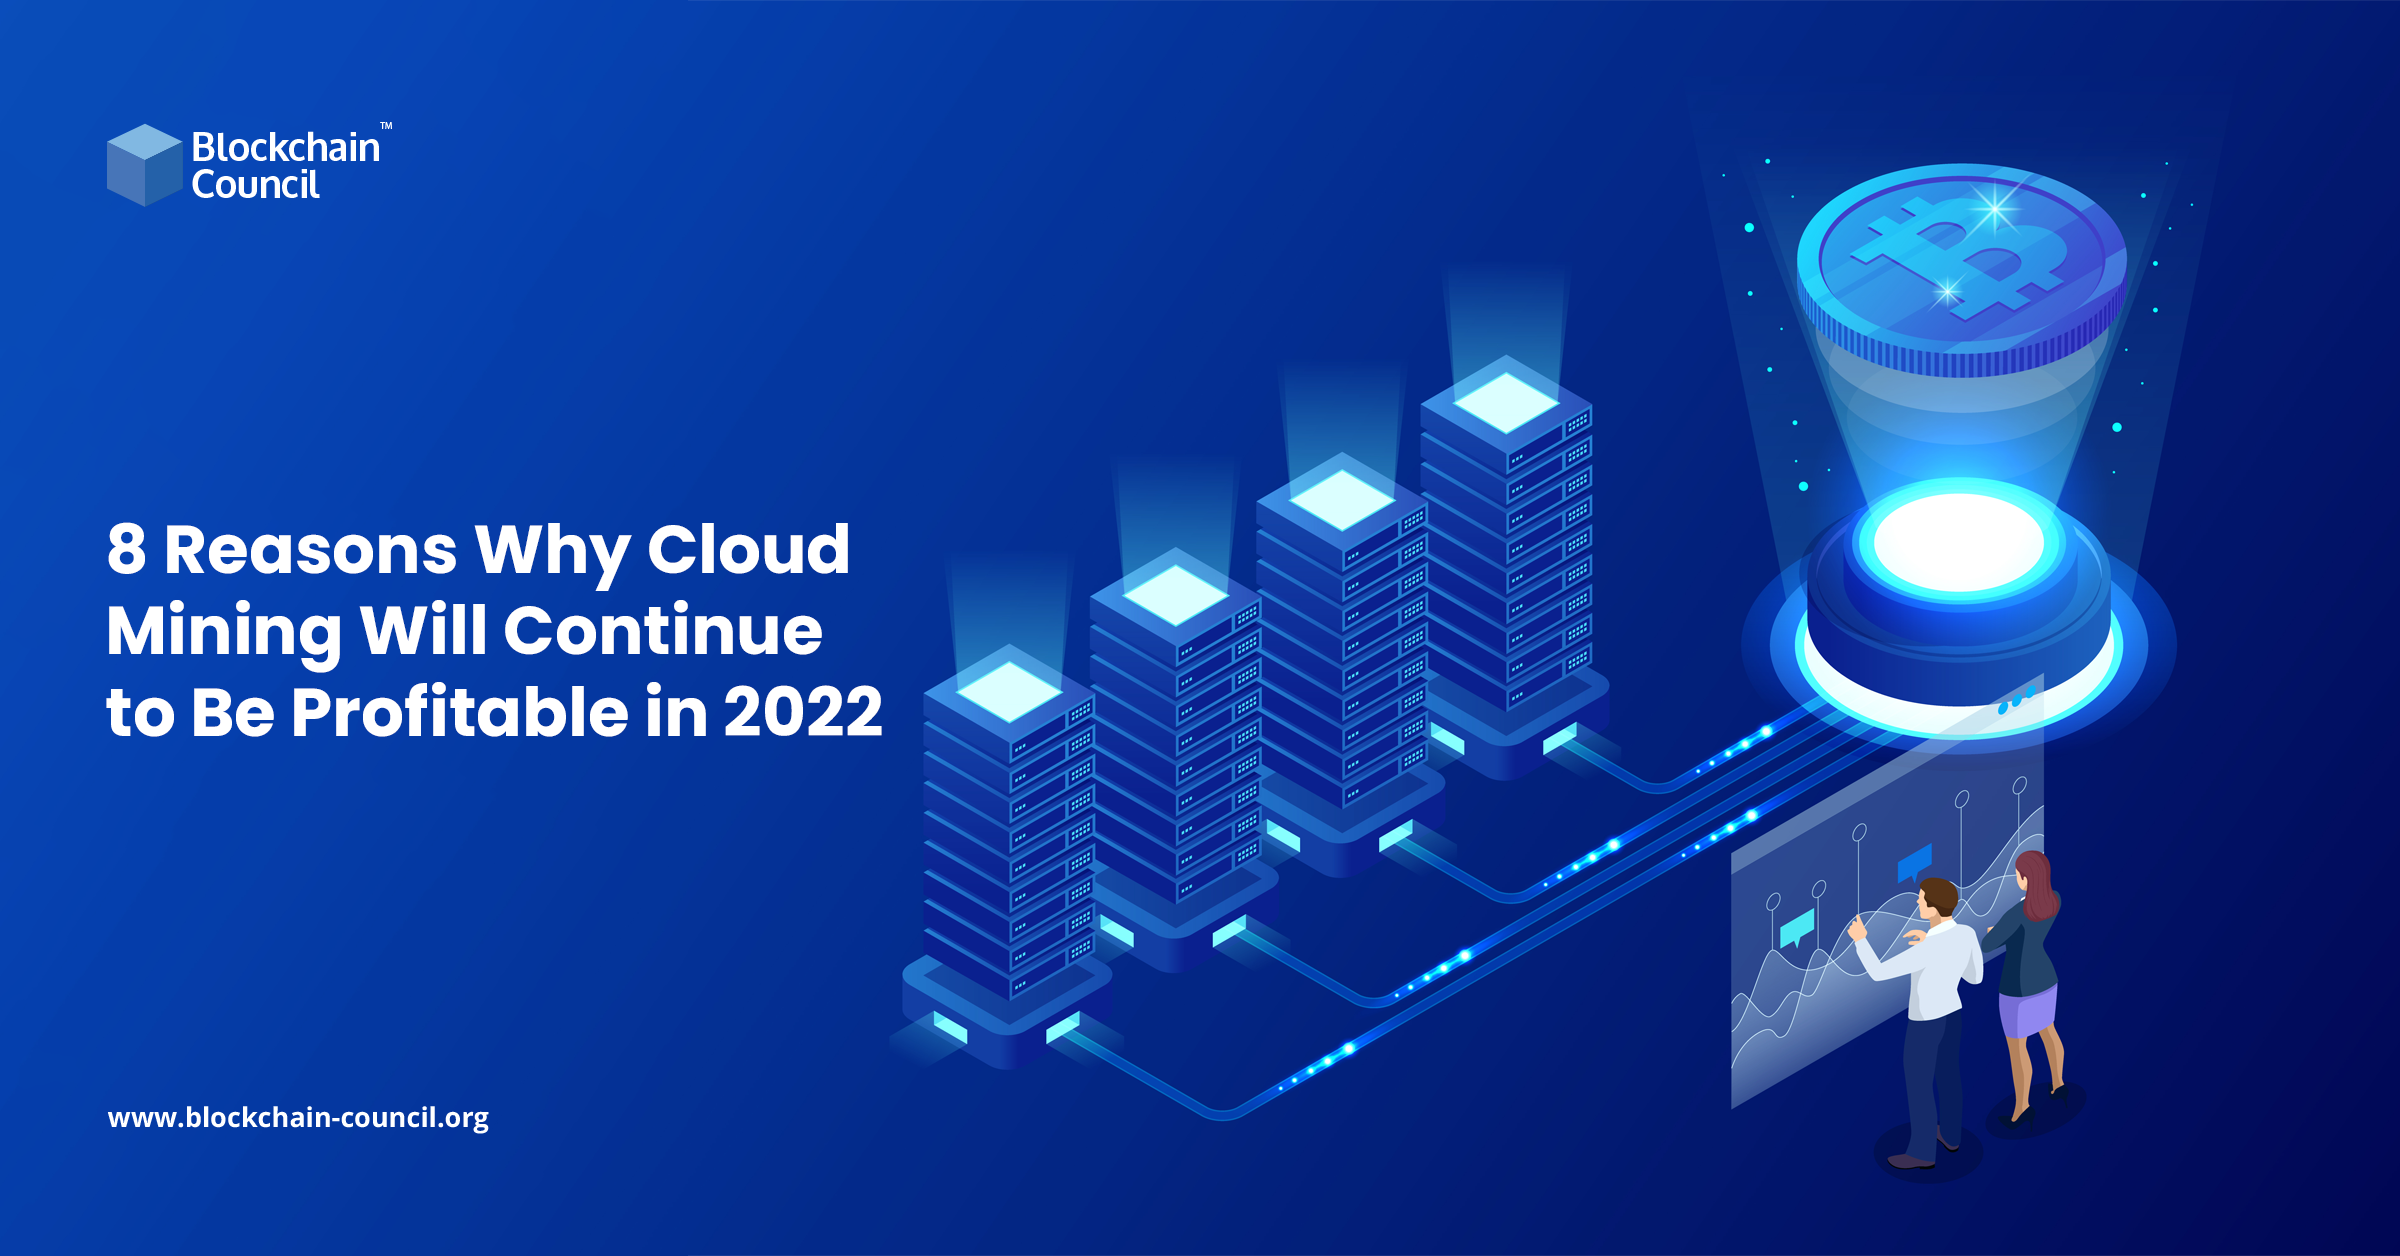 8 Reasons Why Cloud Mining Will Continue to Be Profitable in 2022